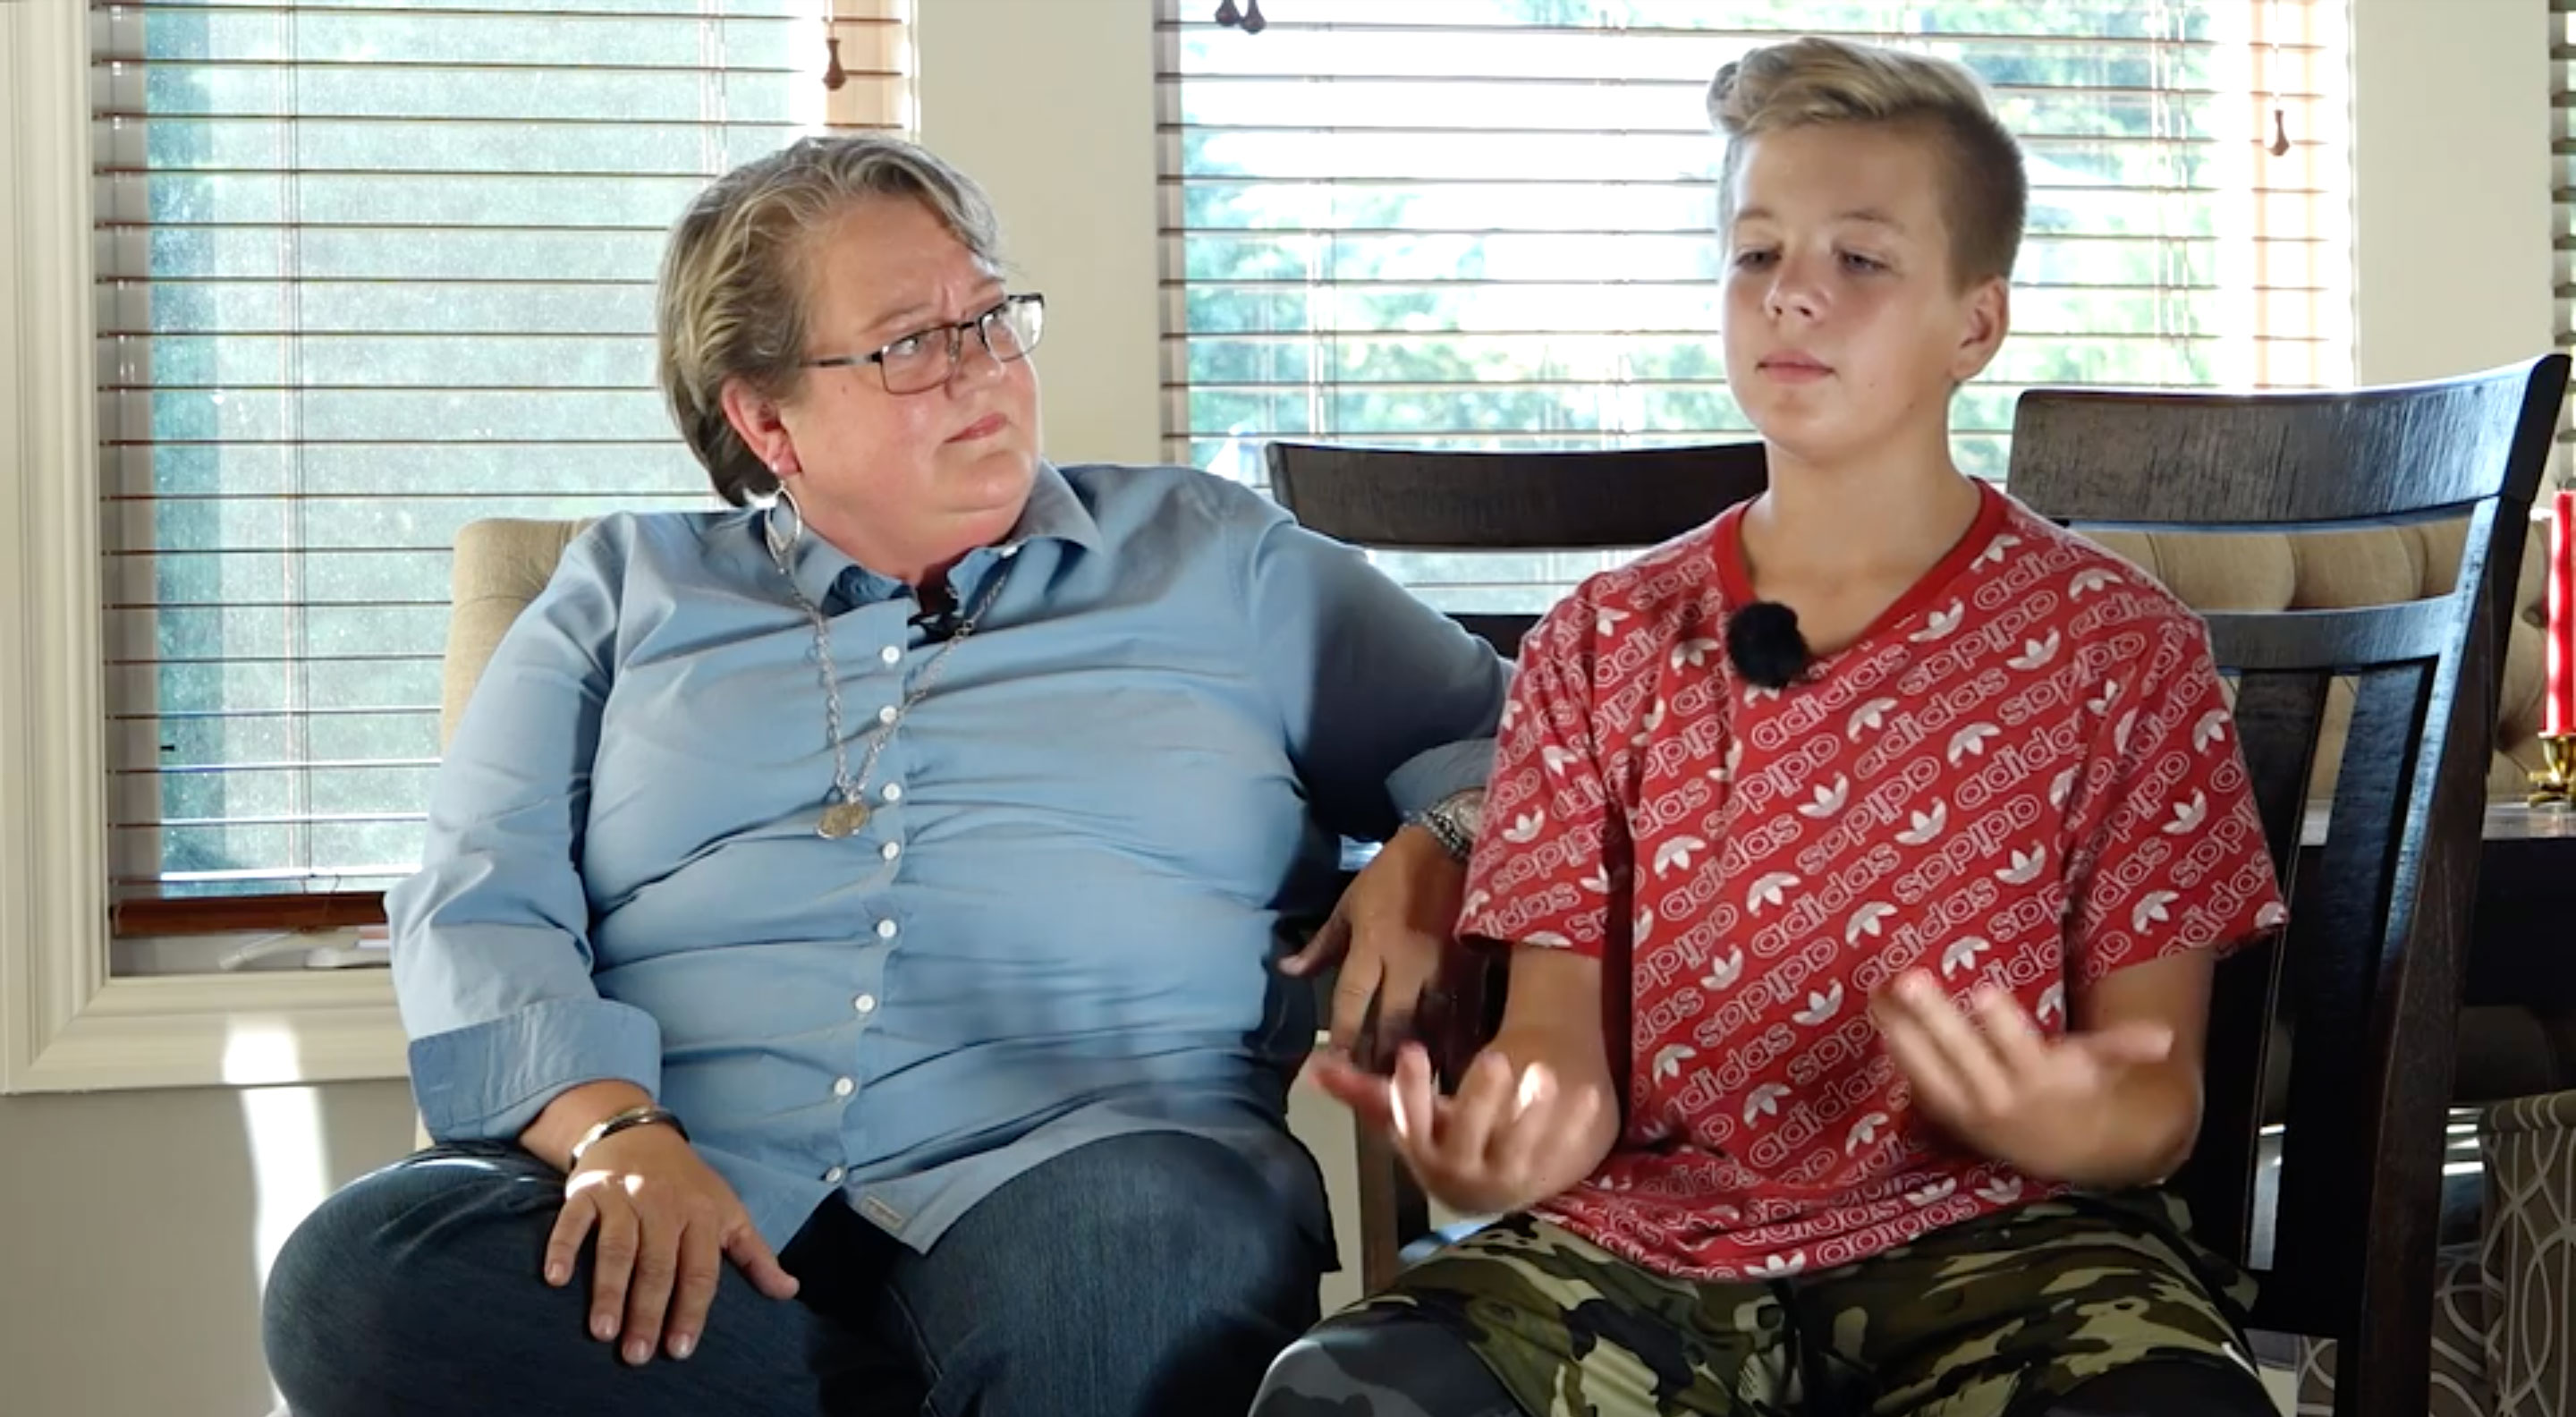 12-year-old boy asking why theres no law to protect his lesbian mothers picture